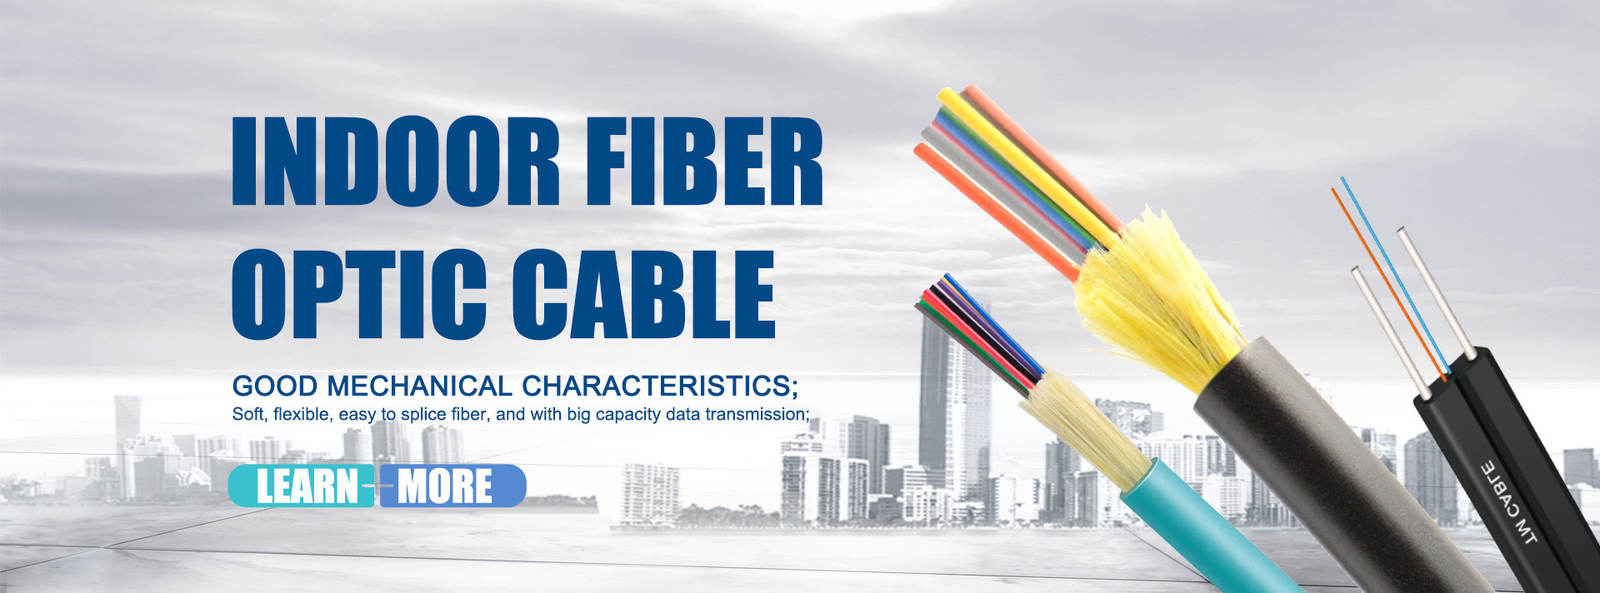 Quality Indoor Fiber Optic Cable & Outdoor Fiber Optic Cable 